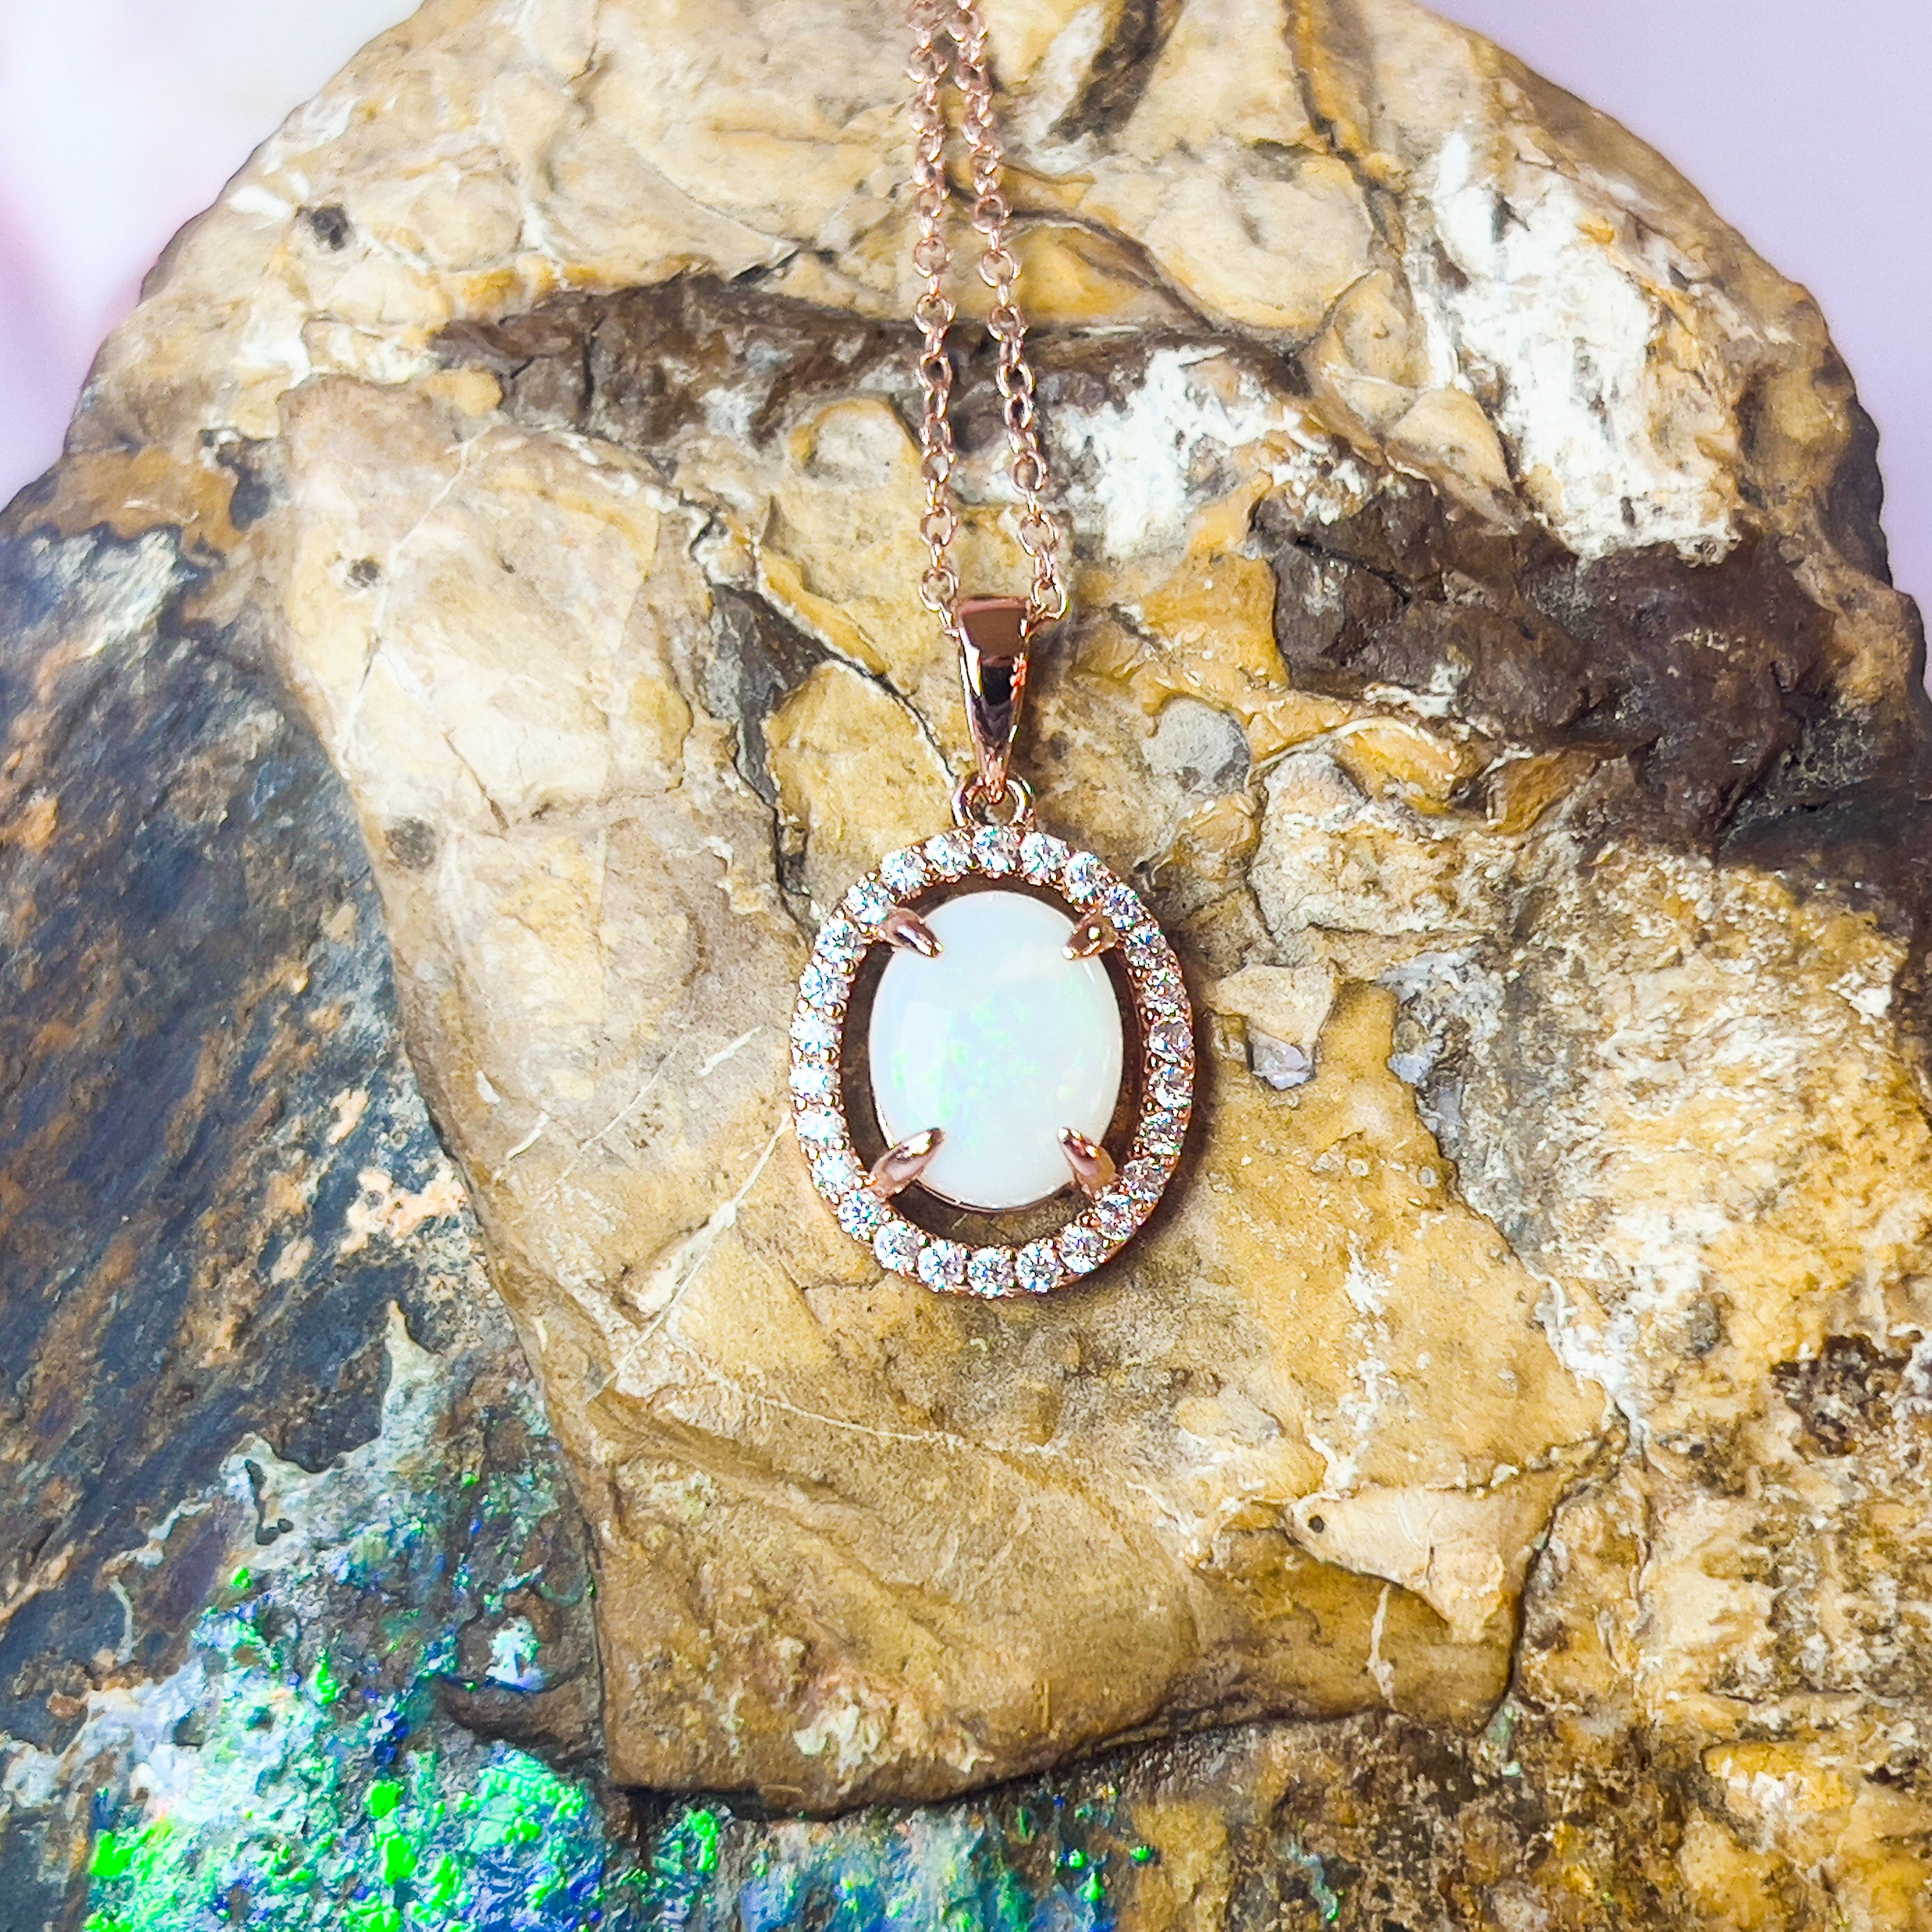 Rose Gold Plated Sterling Silver White Opal Halo Pendant - Dainty, Gold & Silver, Raw & Fire Opal Necklace" - Masterpiece Jewellery Opal & Gems Sydney Australia | Online Shop